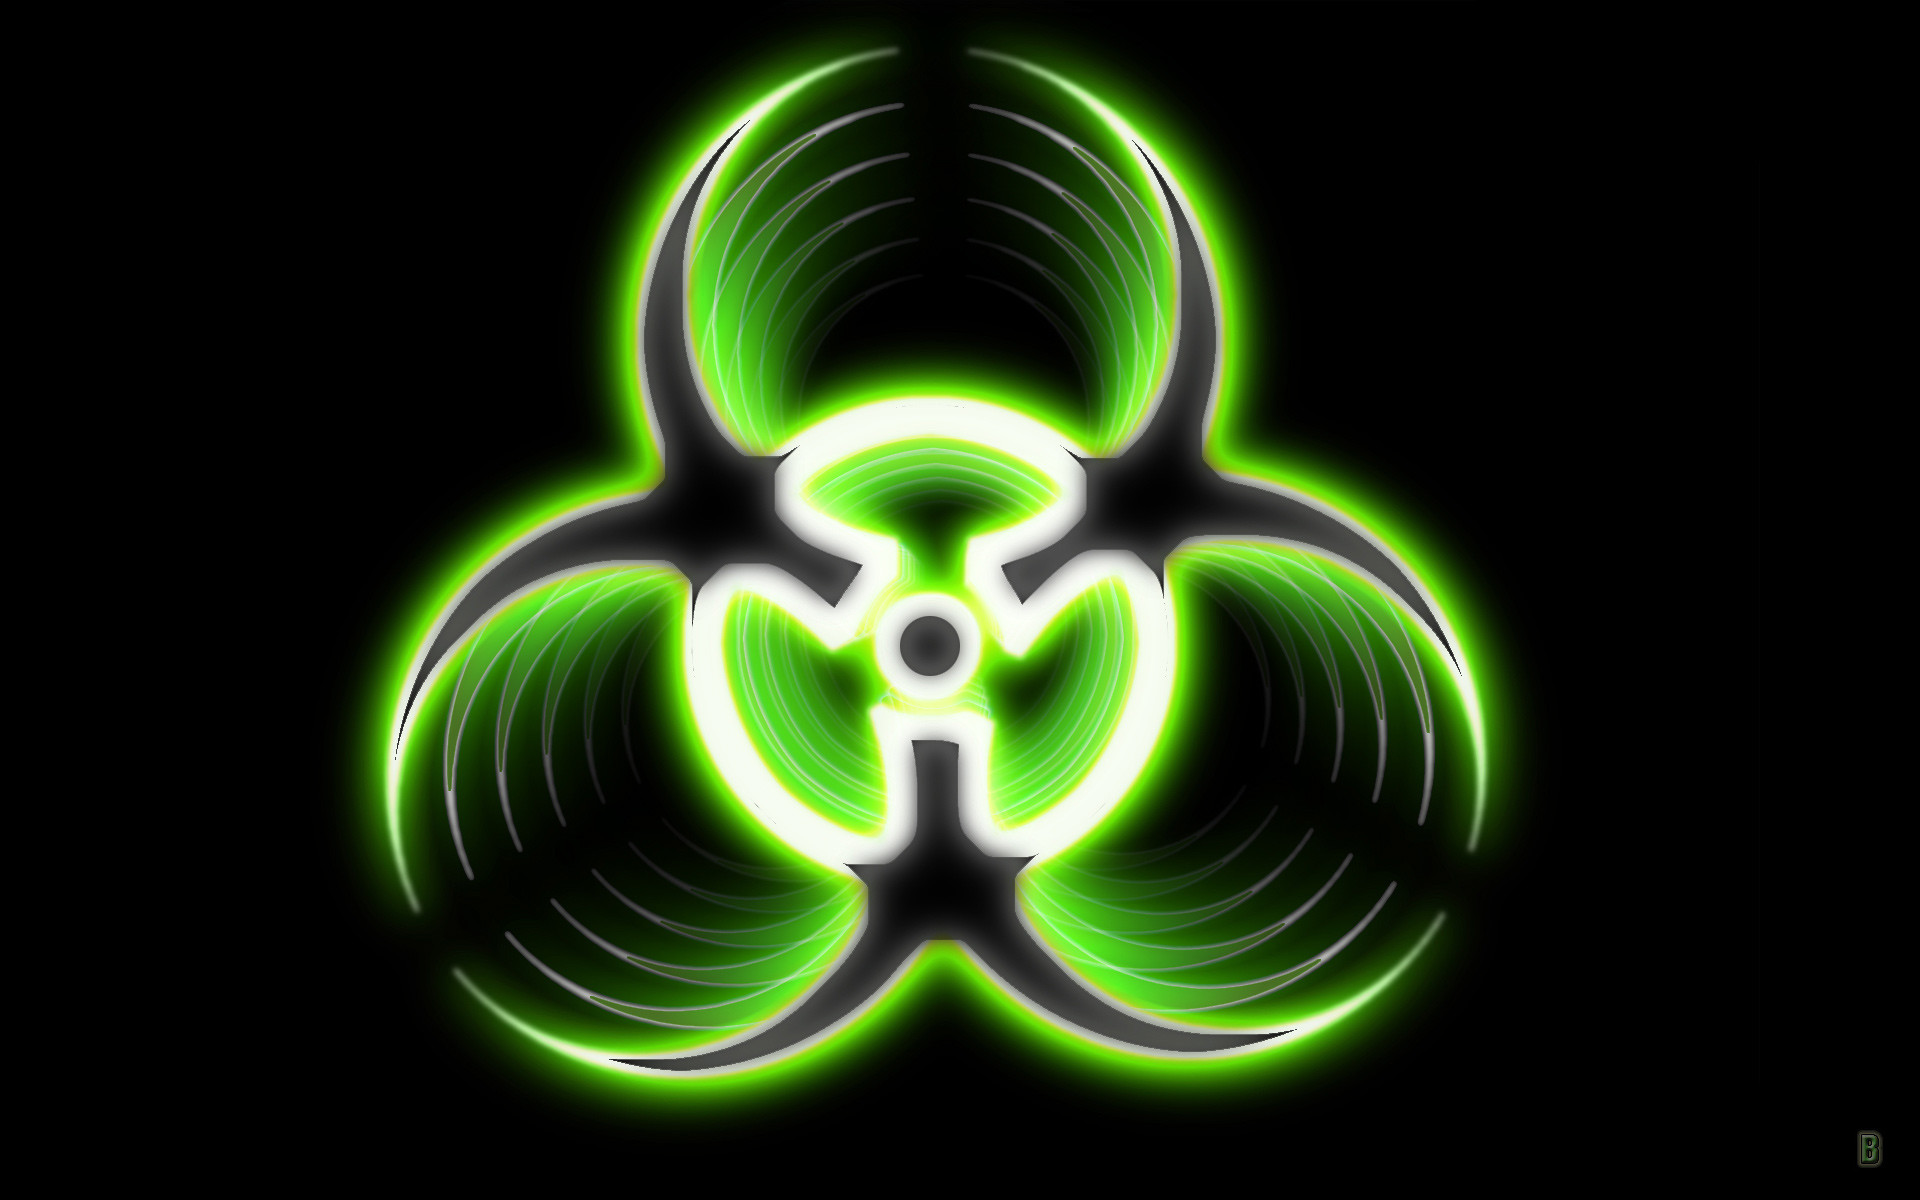 1920x1200 Biohazard-blue-logo-symbol Photo: This Photo was uploaded by darrnjohnson.  Find other Biohazard-blue-logo-symbol pictures and photos or upload your  own .